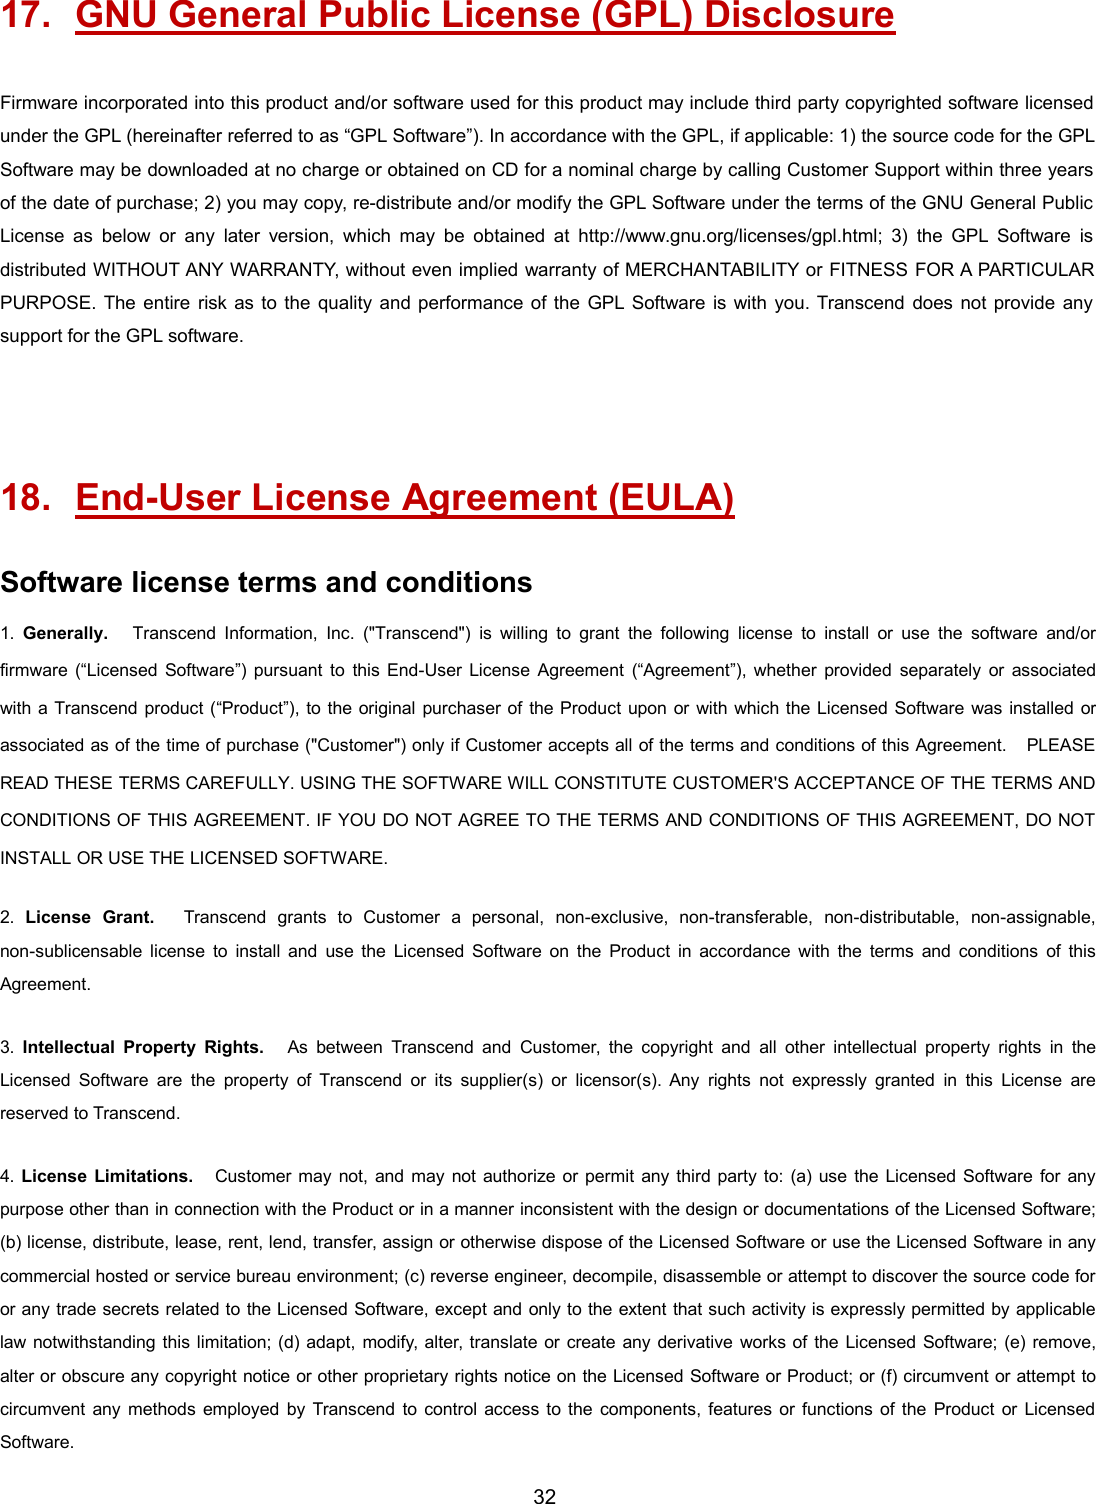 3217. GNU General Public License (GPL) DisclosureFirmware incorporated into this product and/or software used for this product may include third party copyrighted software licensedunder the GPL (hereinafter referred to as “GPL Software”). In accordance with the GPL, if applicable: 1) the source code for the GPLSoftware may be downloaded at no charge or obtained on CD for a nominal charge by calling Customer Support within three yearsof the date of purchase; 2) you may copy, re-distribute and/or modify the GPL Software under the terms of the GNU General PublicLicense as below or any later version, which may be obtained at http://www.gnu.org/licenses/gpl.html; 3) the GPL Software isdistributed WITHOUT ANY WARRANTY, without even implied warranty of MERCHANTABILITY or FITNESS FOR A PARTICULARPURPOSE. The entire risk as to the quality and performance of the GPL Software is with you. Transcend does not provide anysupport for the GPL software.18. End-User License Agreement (EULA)Software license terms and conditions1. Generally. Transcend Information, Inc. (&quot;Transcend&quot;) is willing to grant the following license to install or use the software and/orfirmware (“Licensed Software”) pursuant to this End-User License Agreement (“Agreement”), whether provided separately or associatedwith a Transcend product (“Product”), to the original purchaser of the Product upon or with which the Licensed Software was installed orassociated as of the time of purchase (&quot;Customer&quot;) only if Customer accepts all of the terms and conditions of this Agreement. PLEASEREAD THESE TERMS CAREFULLY. USING THE SOFTWARE WILL CONSTITUTE CUSTOMER&apos;S ACCEPTANCE OF THE TERMS ANDCONDITIONS OF THIS AGREEMENT. IF YOU DO NOT AGREE TO THE TERMS AND CONDITIONS OF THIS AGREEMENT, DO NOTINSTALL OR USE THE LICENSED SOFTWARE.2. License Grant. Transcend grants to Customer a personal, non-exclusive, non-transferable, non-distributable, non-assignable,non-sublicensable license to install and use the Licensed Software on the Product in accordance with the terms and conditions of thisAgreement.3. Intellectual Property Rights. As between Transcend and Customer, the copyright and all other intellectual property rights in theLicensed Software are the property of Transcend or its supplier(s) or licensor(s). Any rights not expressly granted in this License arereserved to Transcend.4. License Limitations. Customer may not, and may not authorize or permit any third party to: (a) use the Licensed Software for anypurpose other than in connection with the Product or in a manner inconsistent with the design or documentations of the Licensed Software;(b) license, distribute, lease, rent, lend, transfer, assign or otherwise dispose of the Licensed Software or use the Licensed Software in anycommercial hosted or service bureau environment; (c) reverse engineer, decompile, disassemble or attempt to discover the source code foror any trade secrets related to the Licensed Software, except and only to the extent that such activity is expressly permitted by applicablelaw notwithstanding this limitation; (d) adapt, modify, alter, translate or create any derivative works of the Licensed Software; (e) remove,alter or obscure any copyright notice or other proprietary rights notice on the Licensed Software or Product; or (f) circumvent or attempt tocircumvent any methods employed by Transcend to control access to the components, features or functions of the Product or LicensedSoftware.